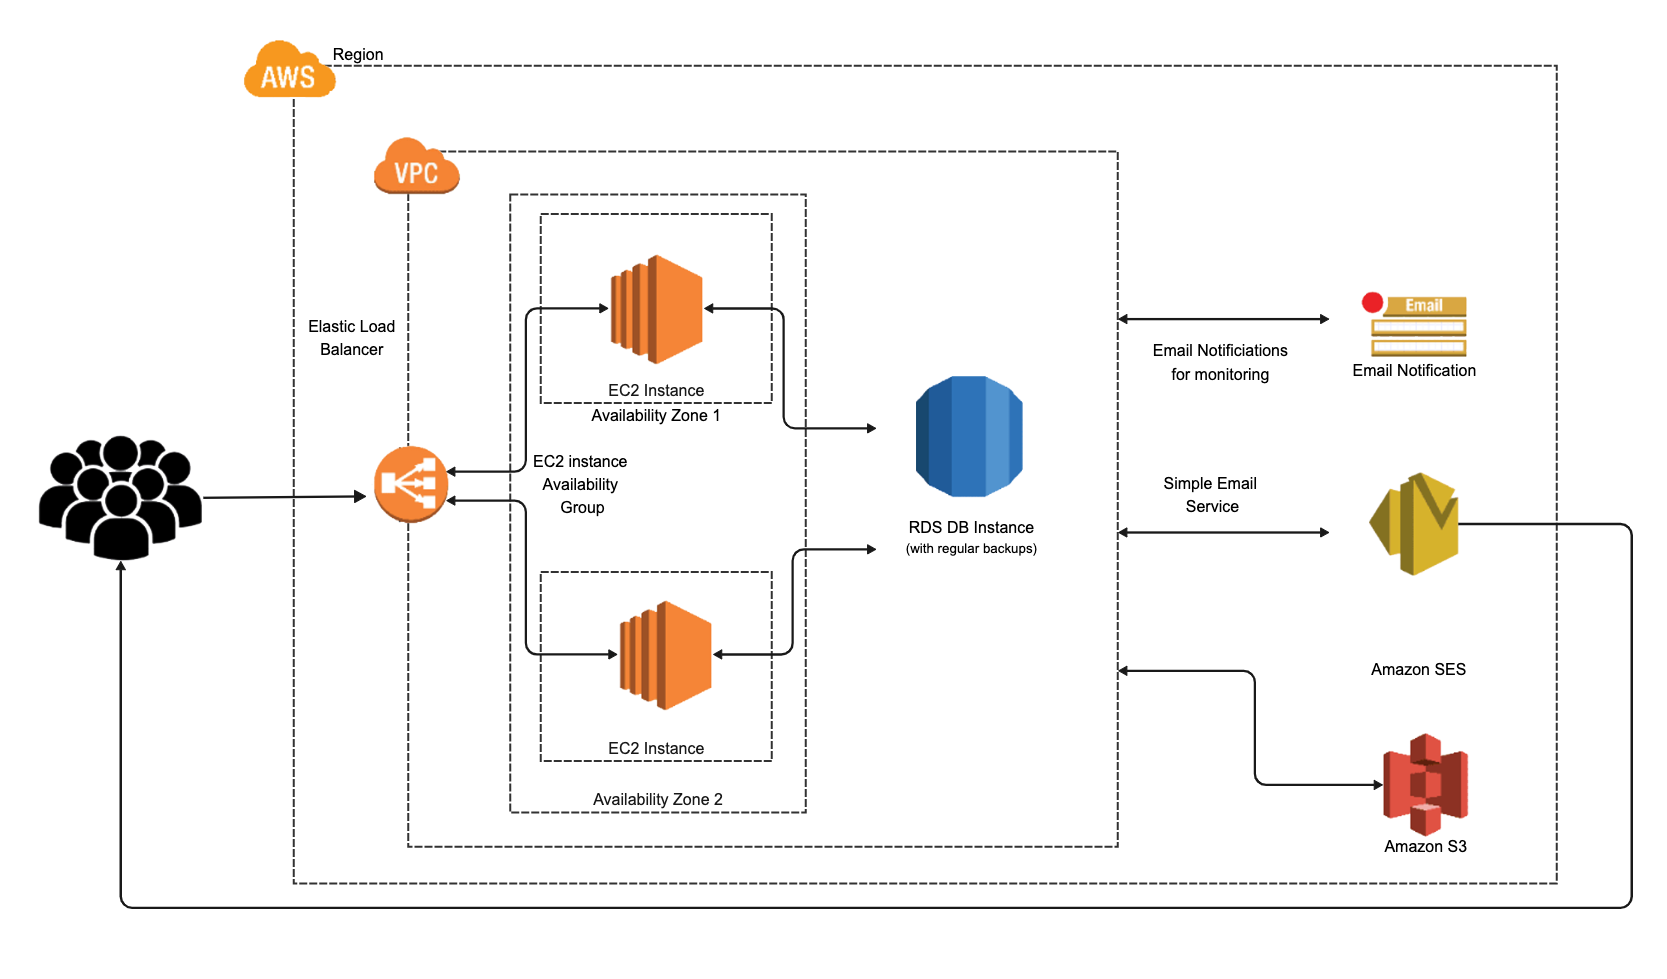 AWS Cloud Diagram for High-Level Architecture